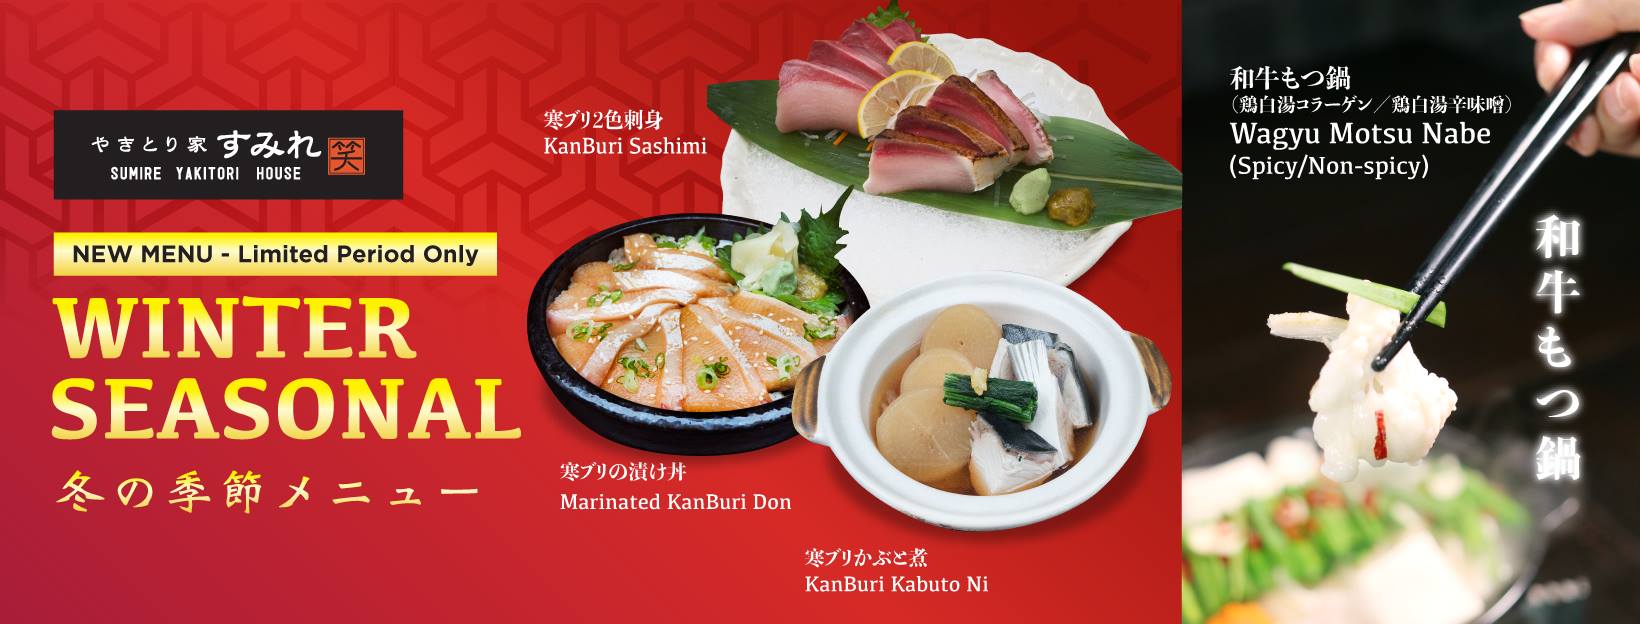 japanese food poster design singapore-fb cover